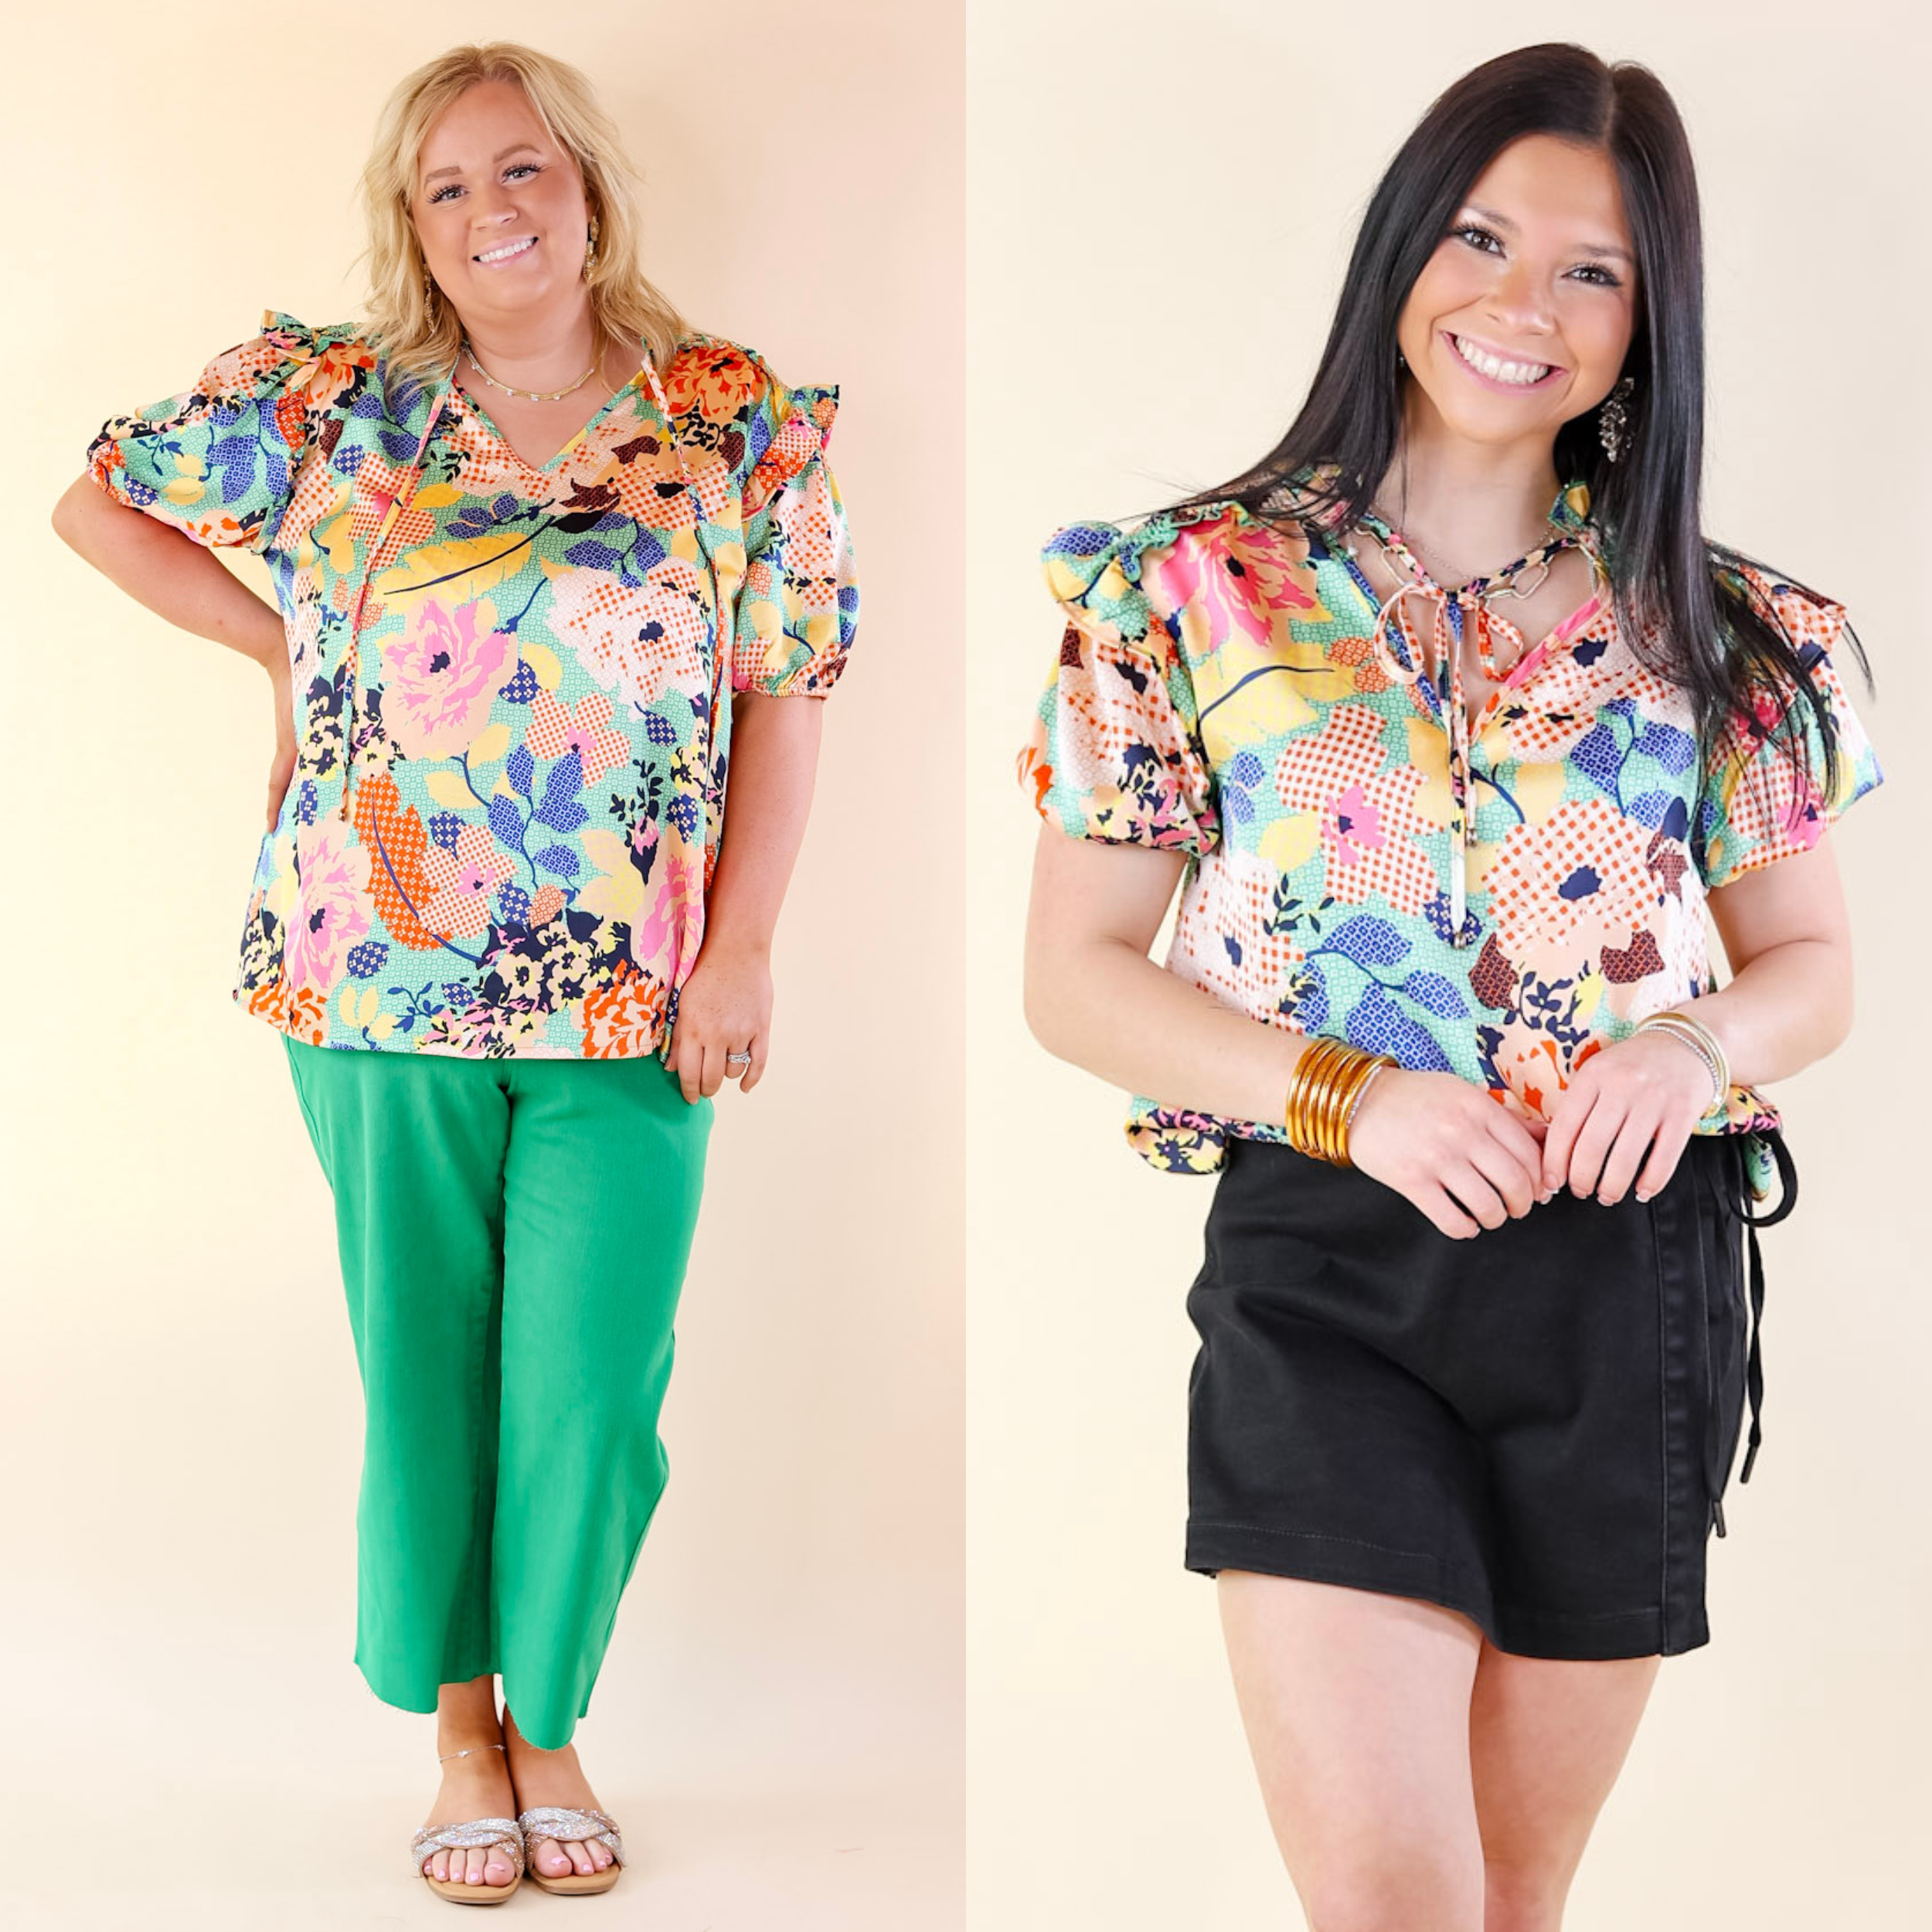 Malibu Villa Floral Print Top with Keyhole and Tie Neckline in Green Mix